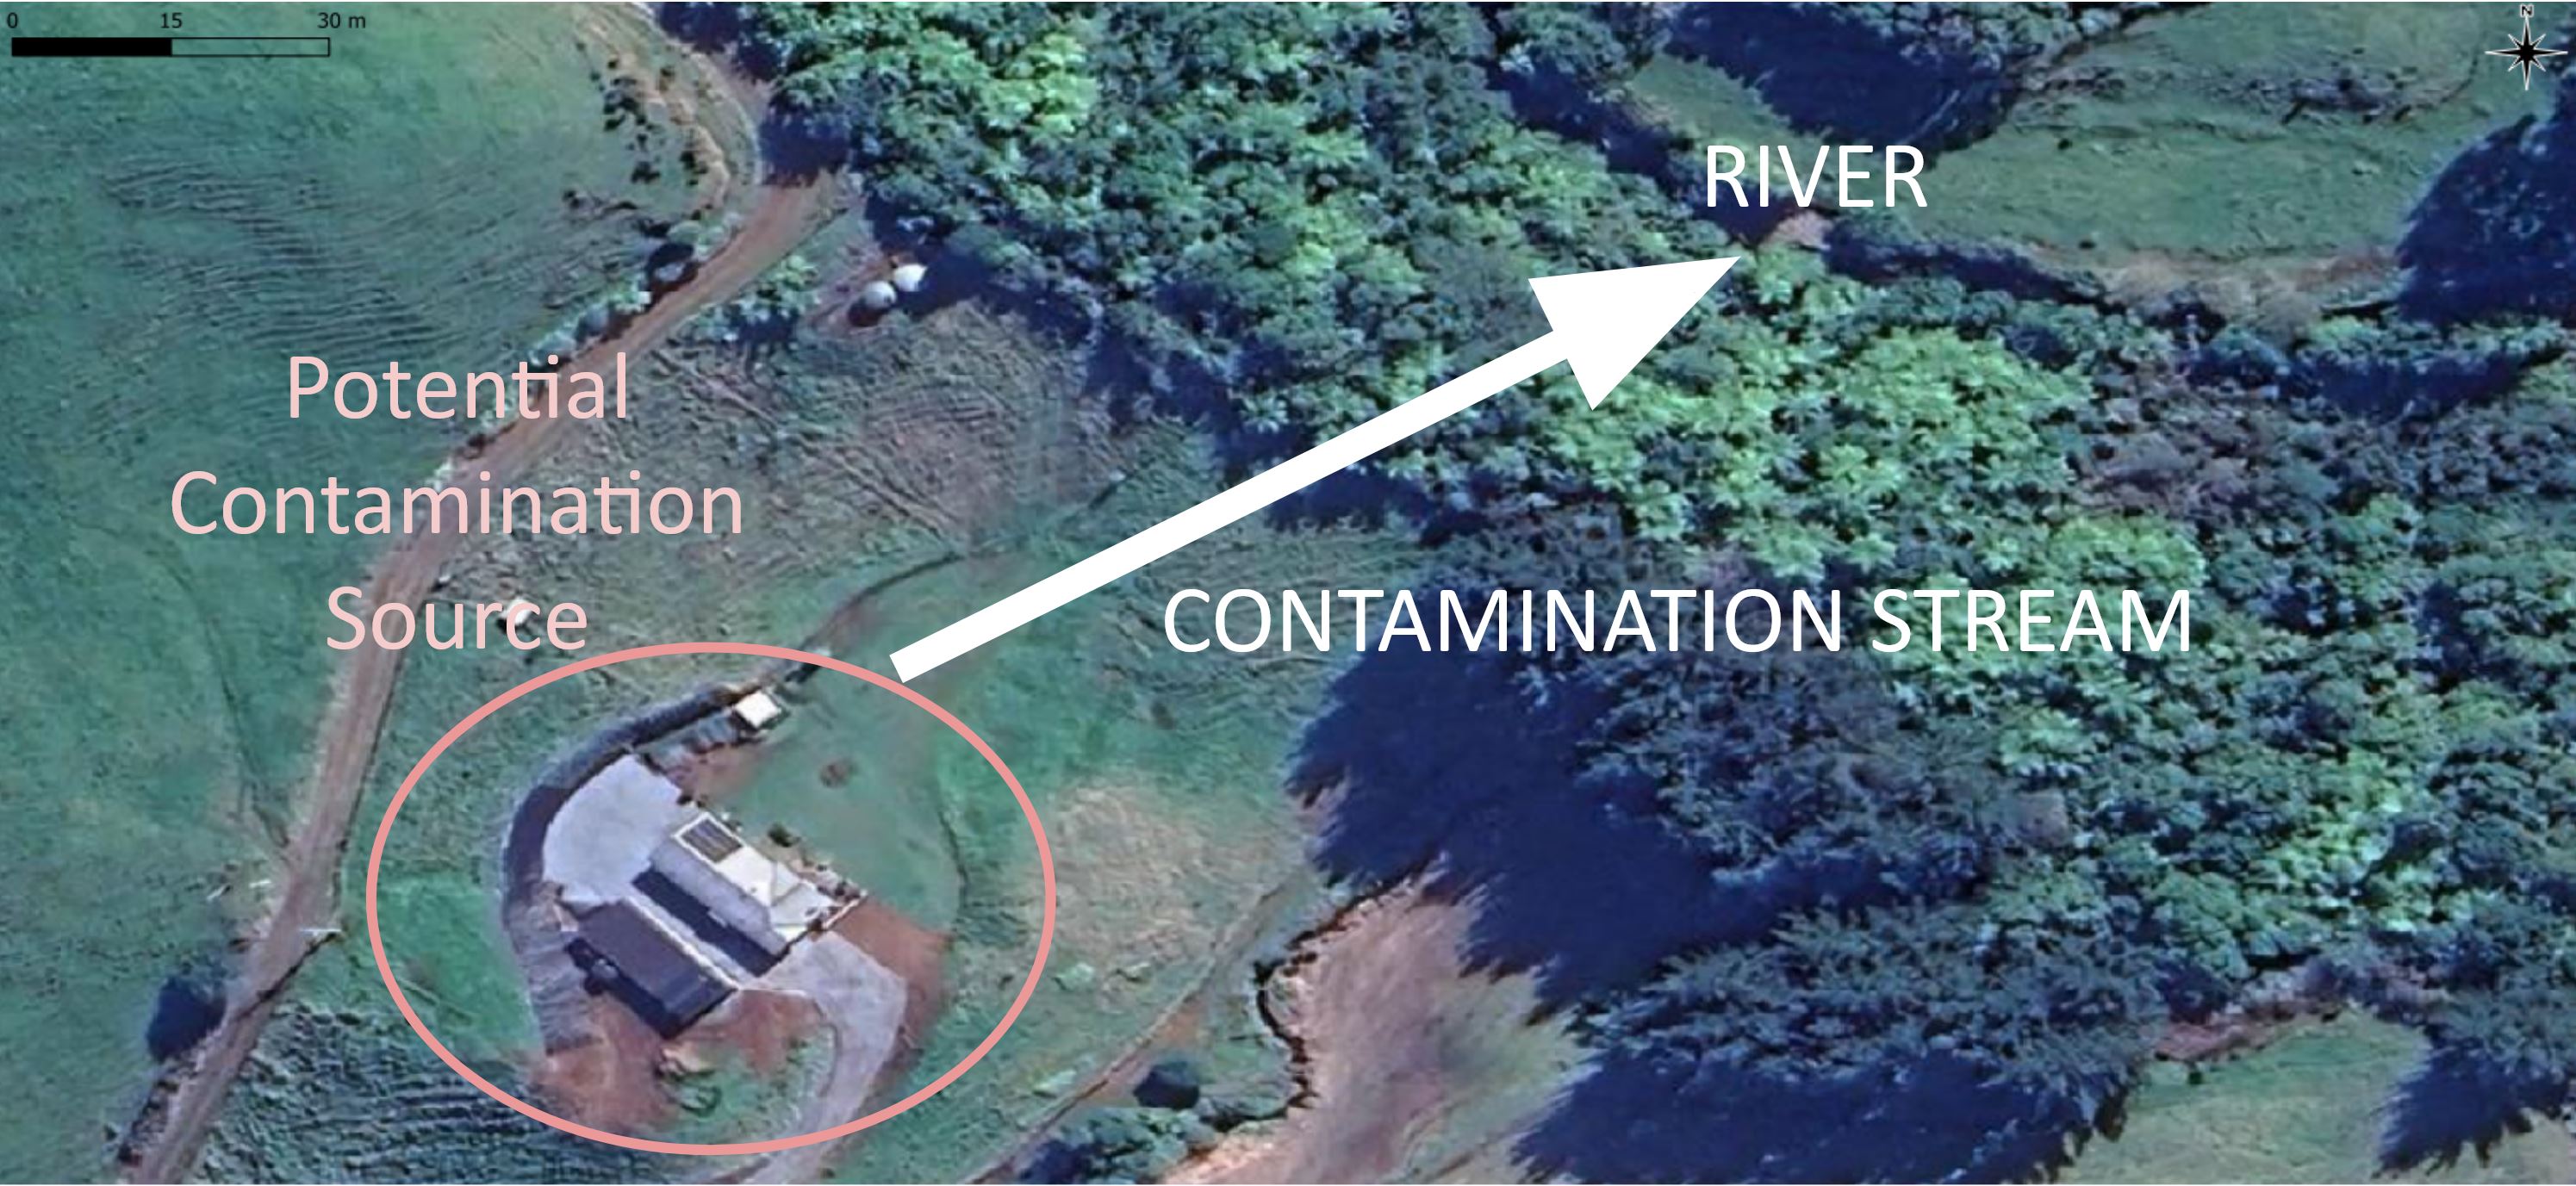 Map showing the potential source of contamination near the river.